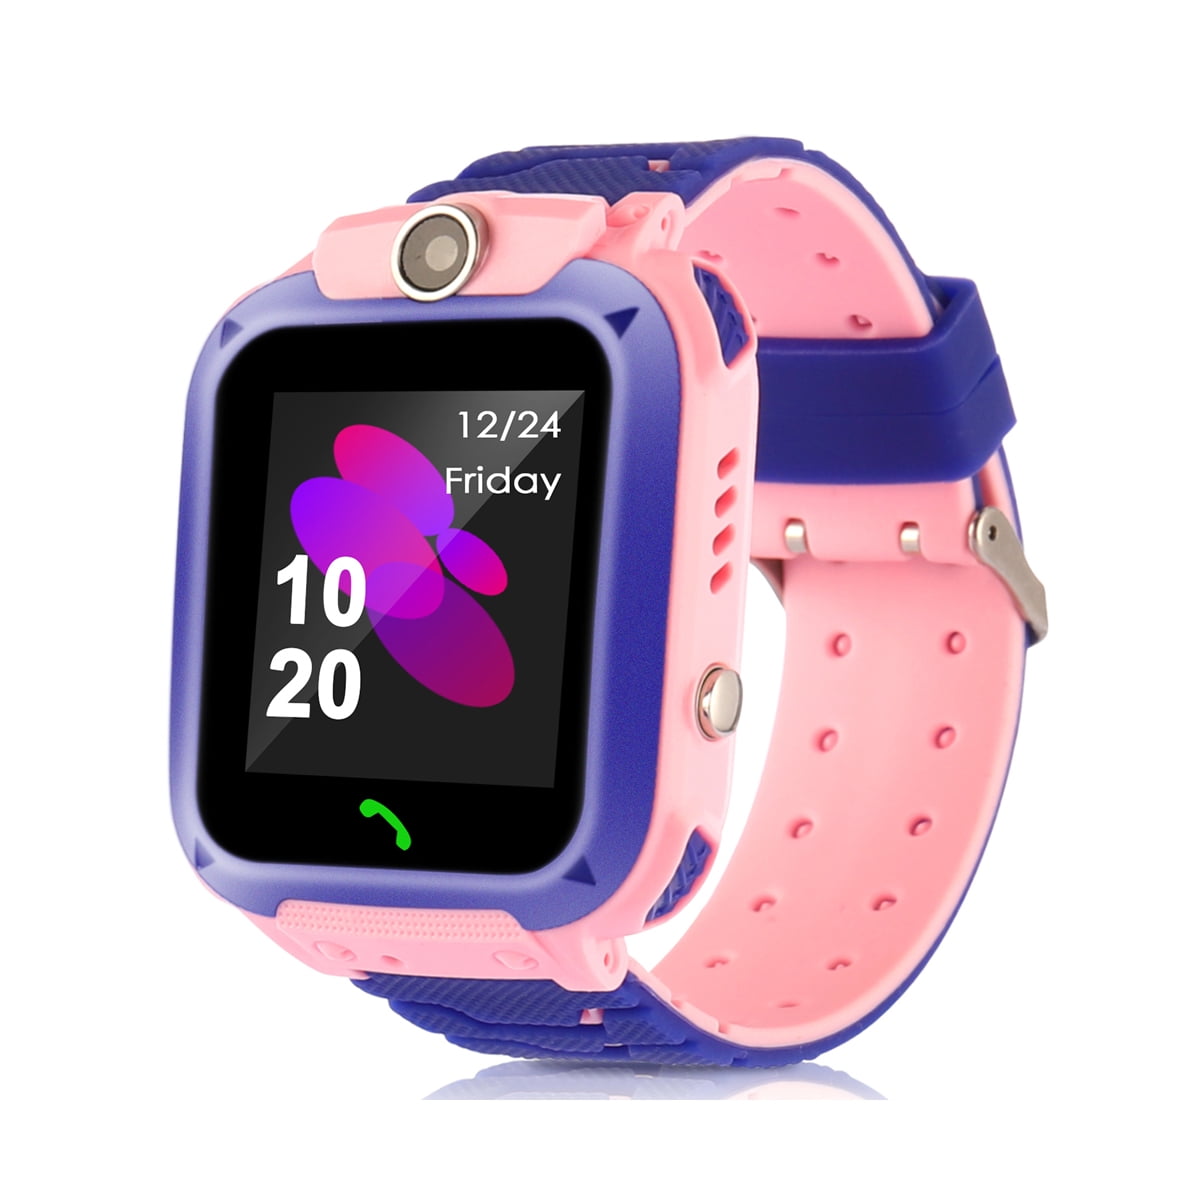 Kids Smart Watches with Tracker Phone Call for Boys Girls, Waterproof